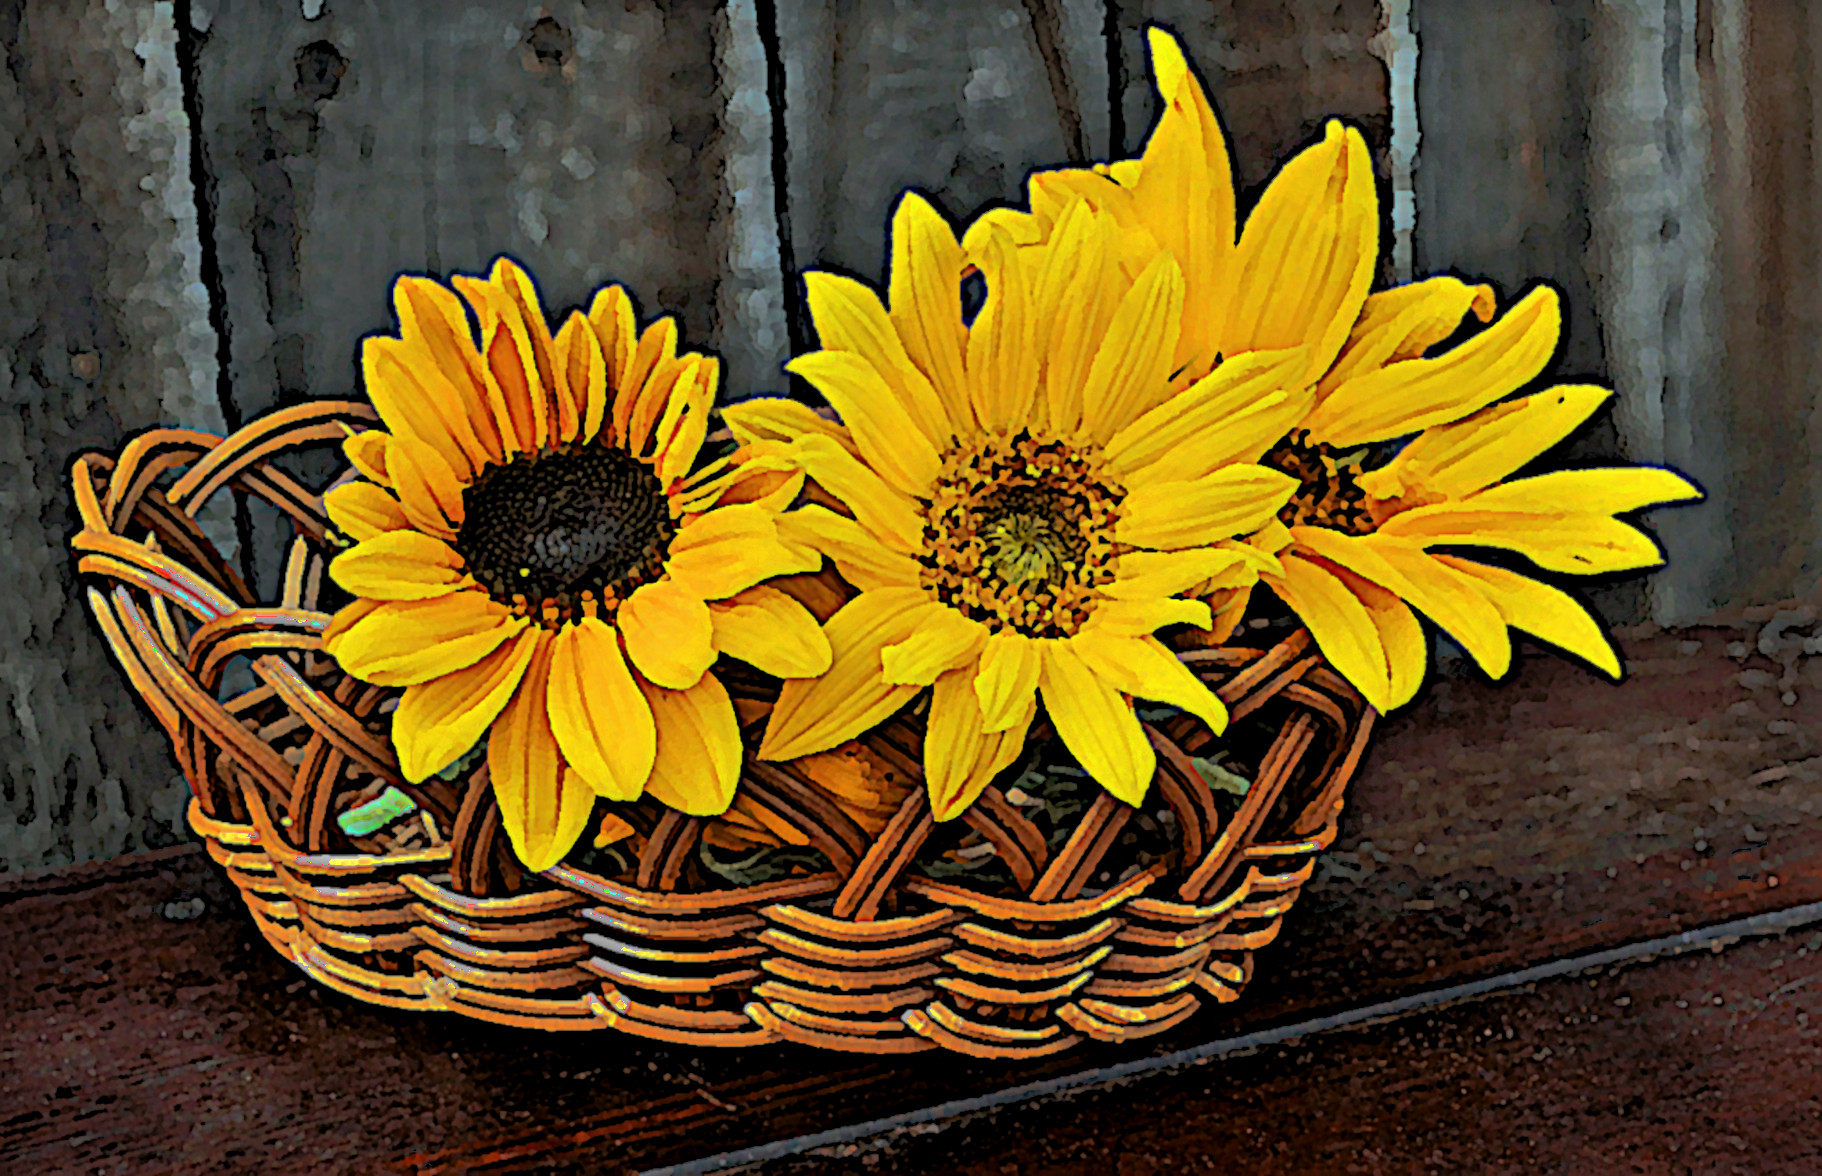 2022-02-03 08-56-07sunflowers-geccbdadf6_1280 with a gouache painting look (effect look regular).jpeg